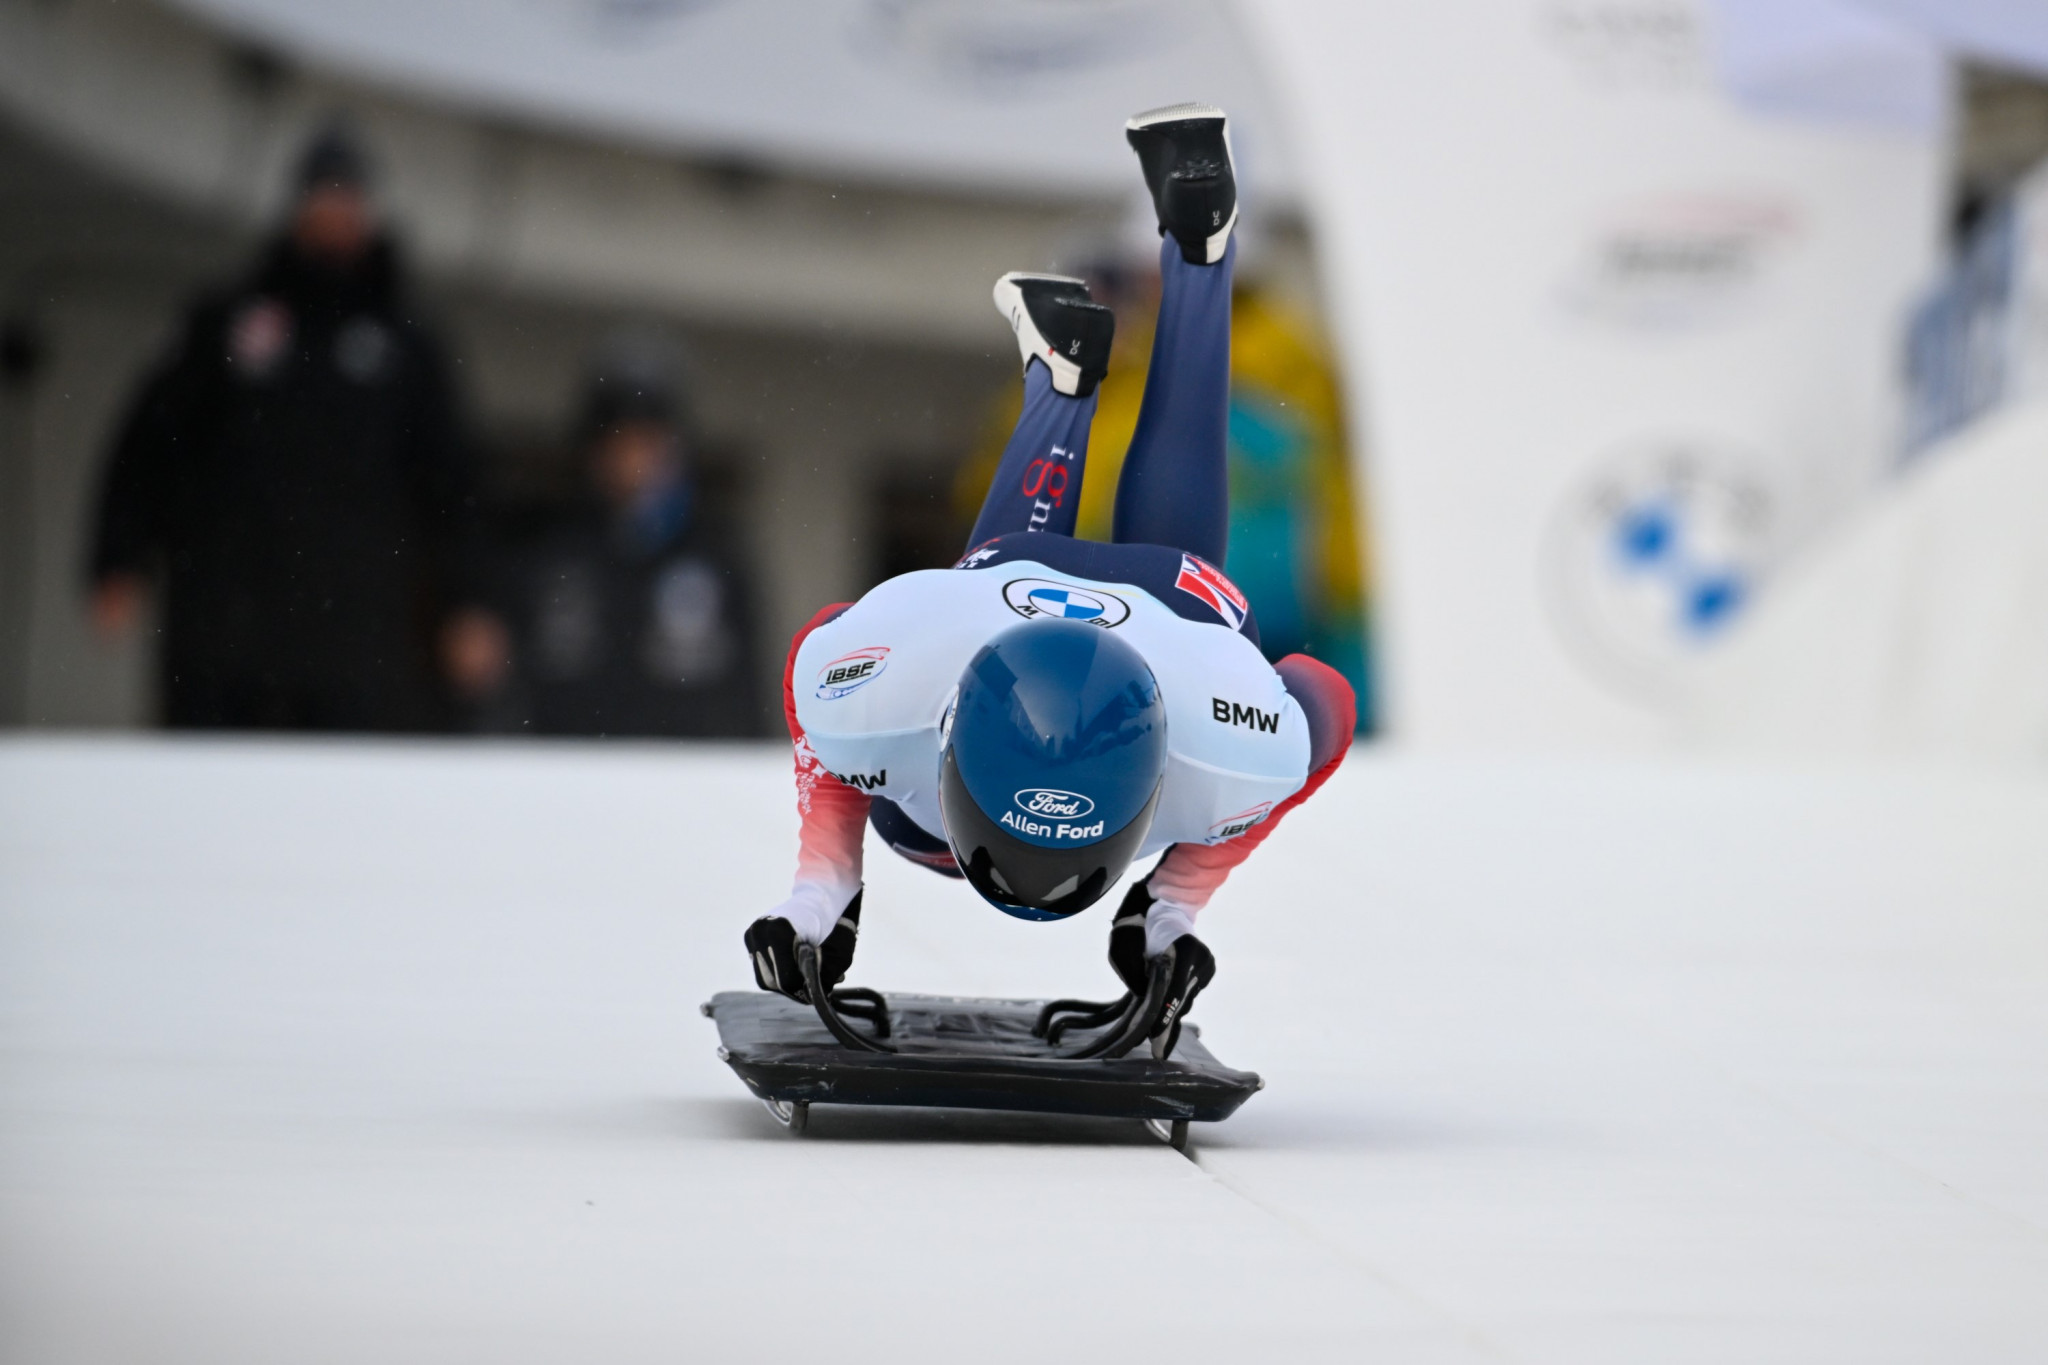 Britain's Matt Weston claimed a huge victory by 1.79sec in the men's skeleton at the IBSF World Championships ©IBSF